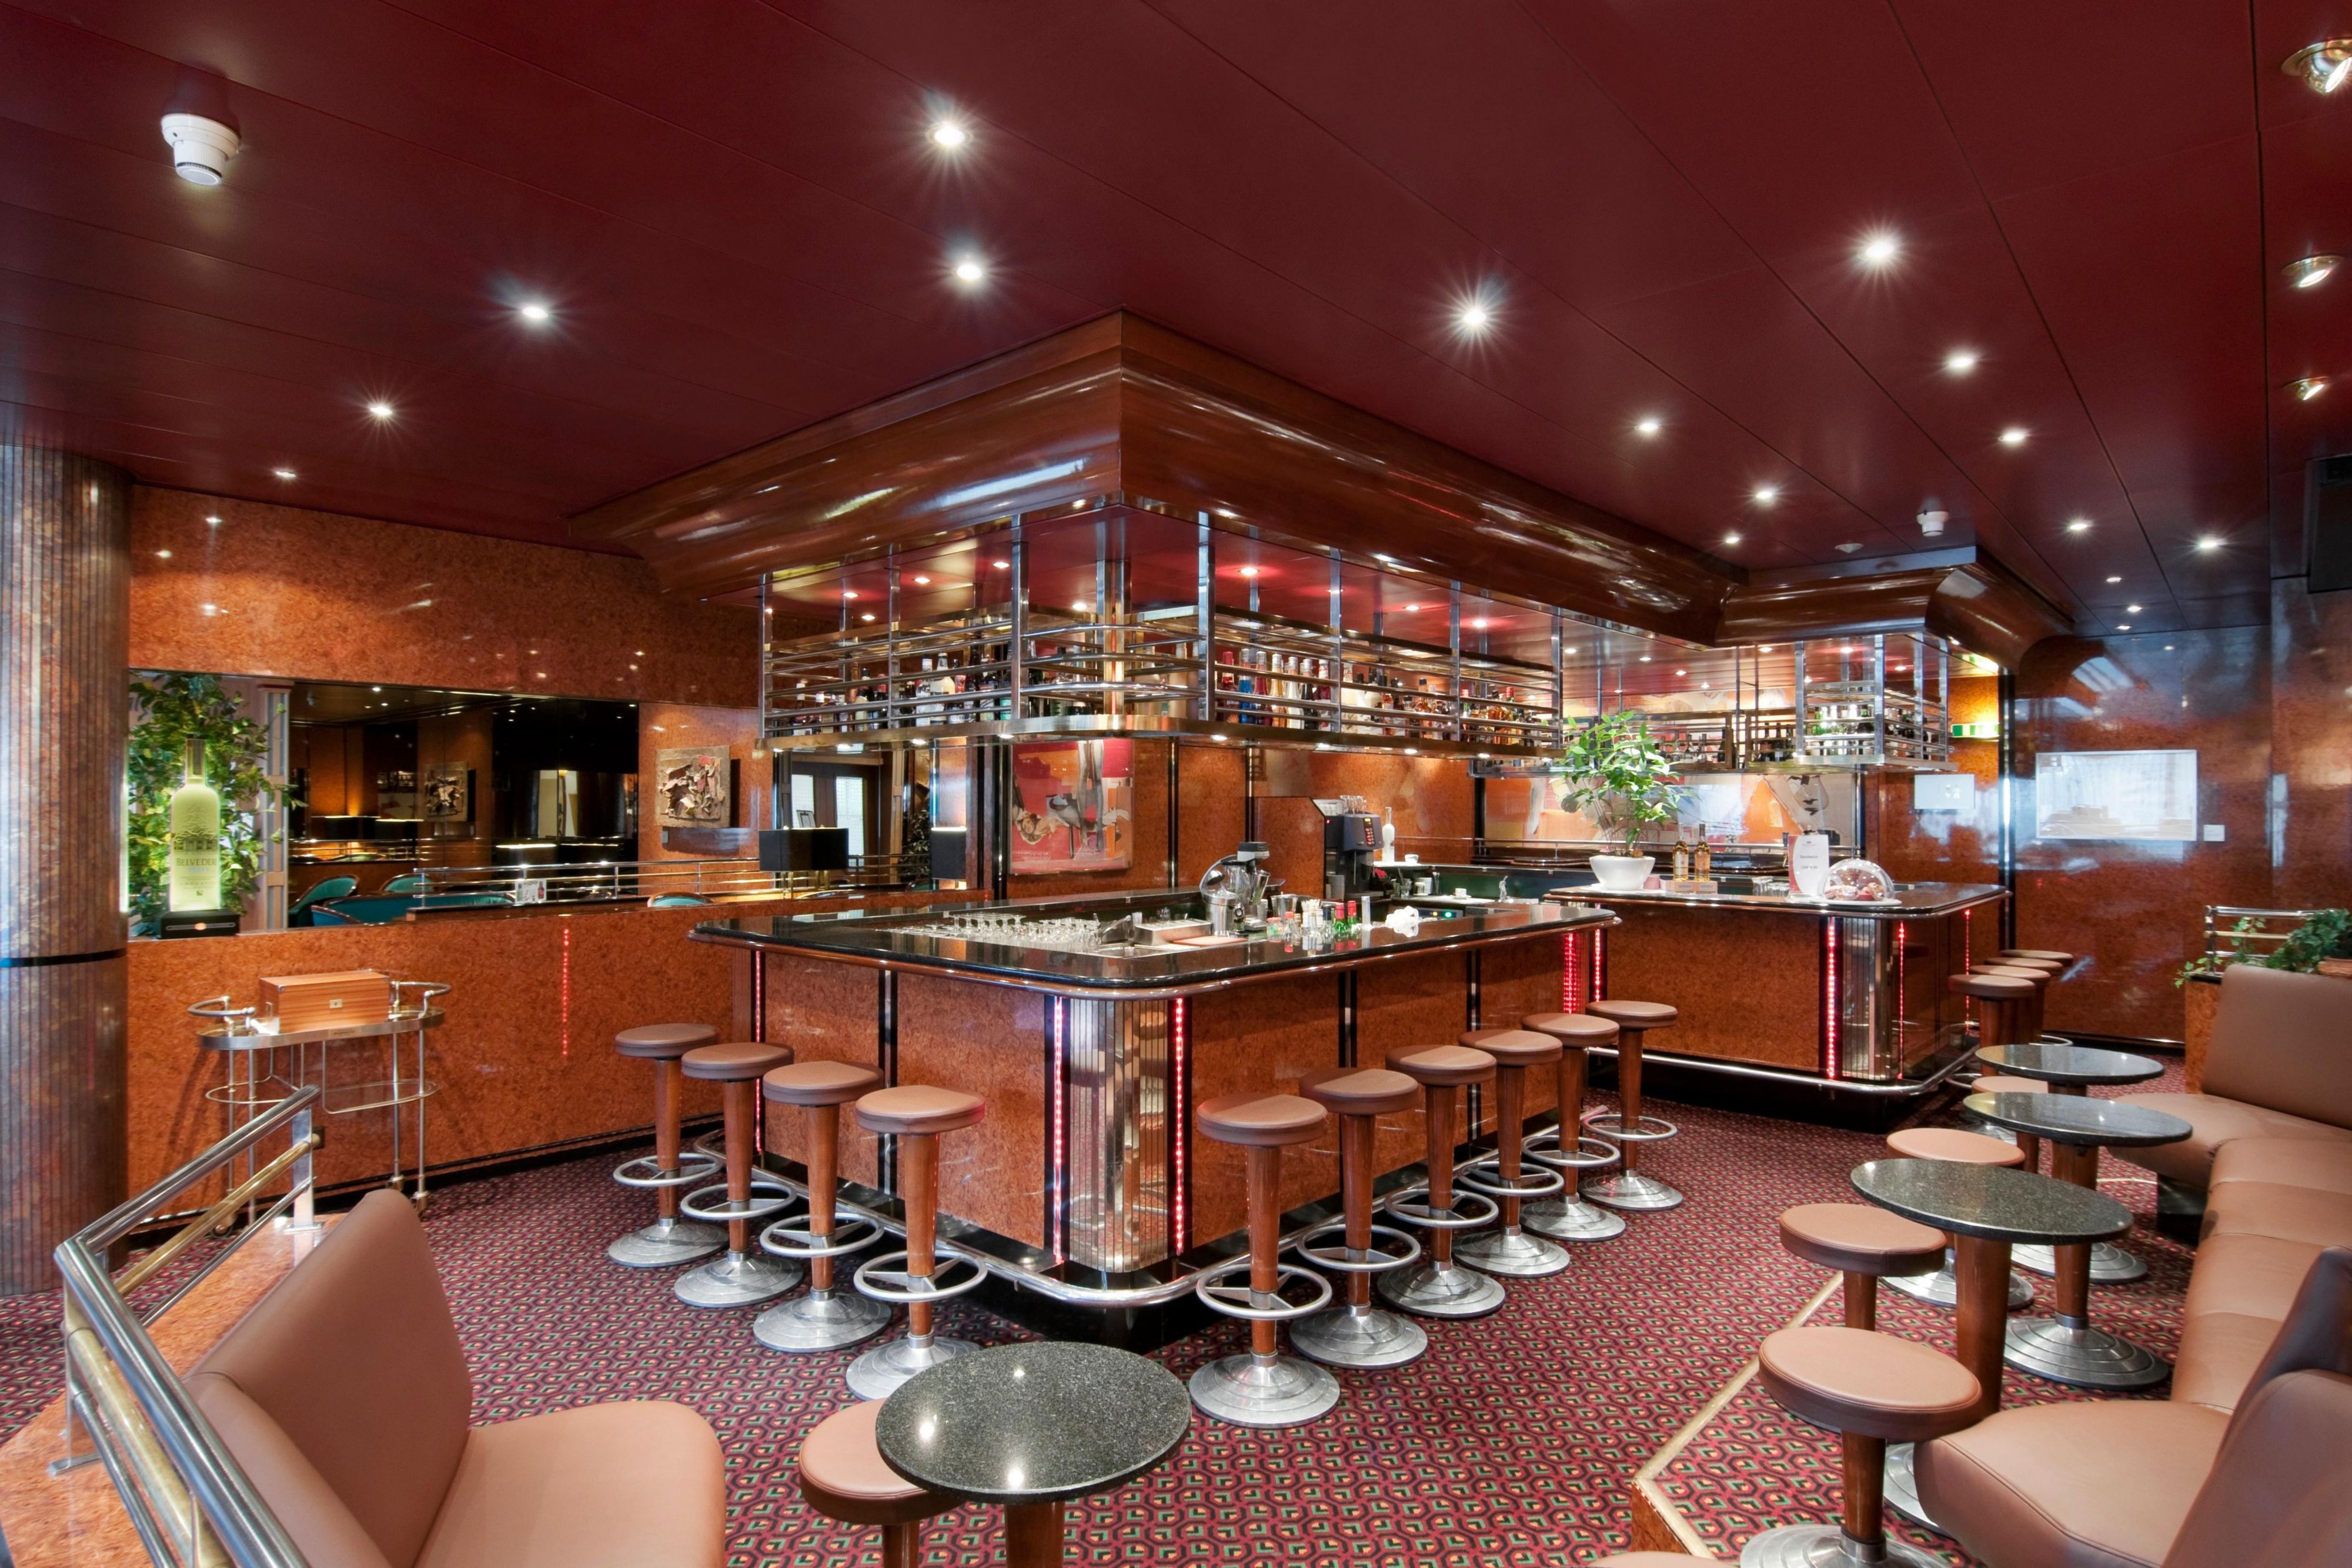 Relax with a drink in the bar of the Crowne Plaza Zürich!